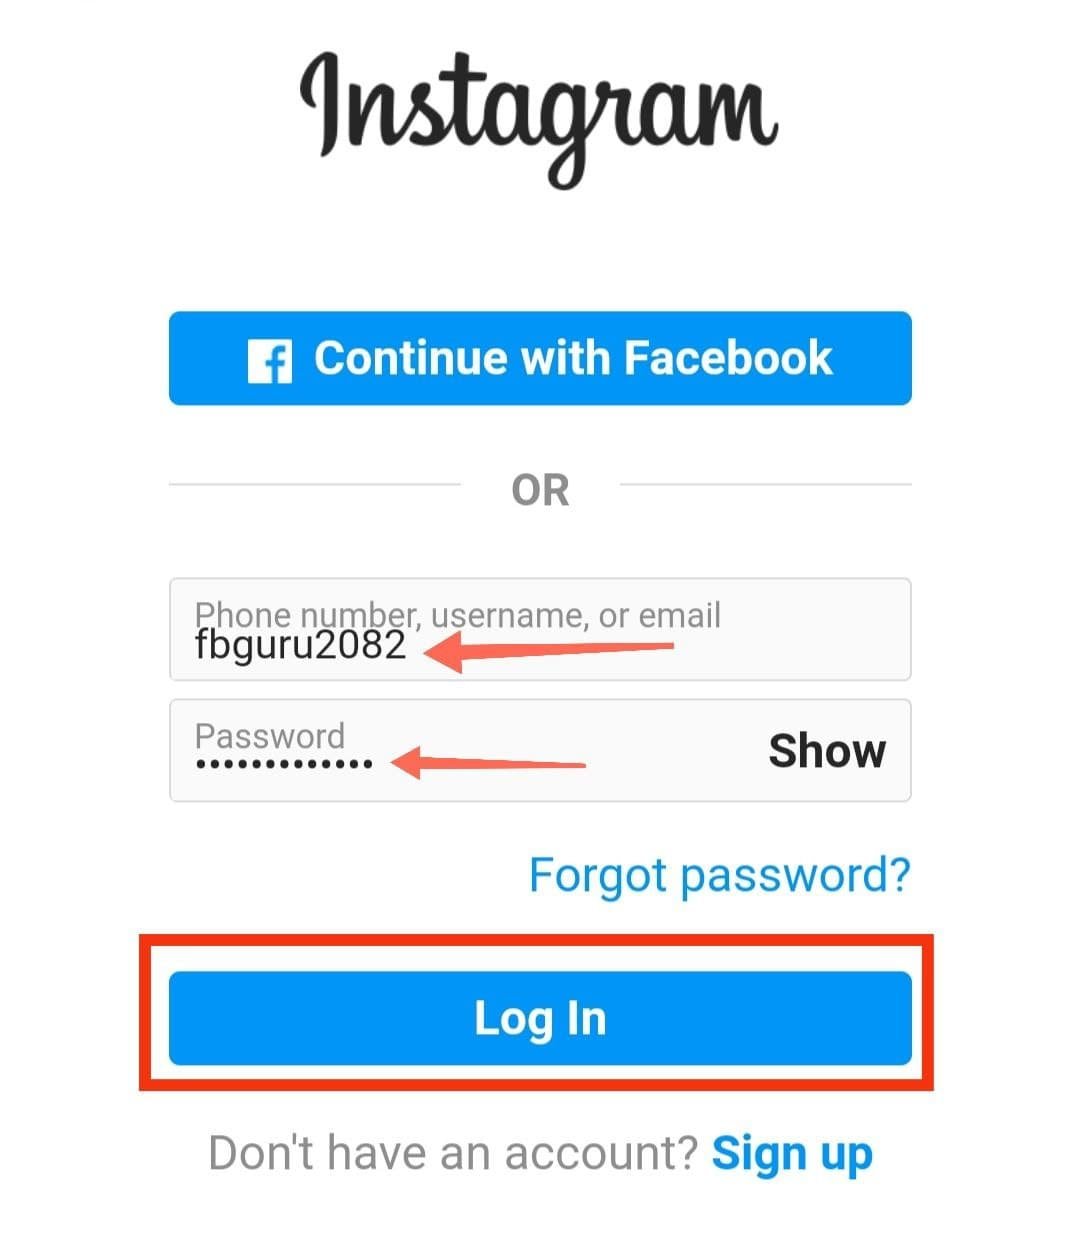 Login By Using Username and Password